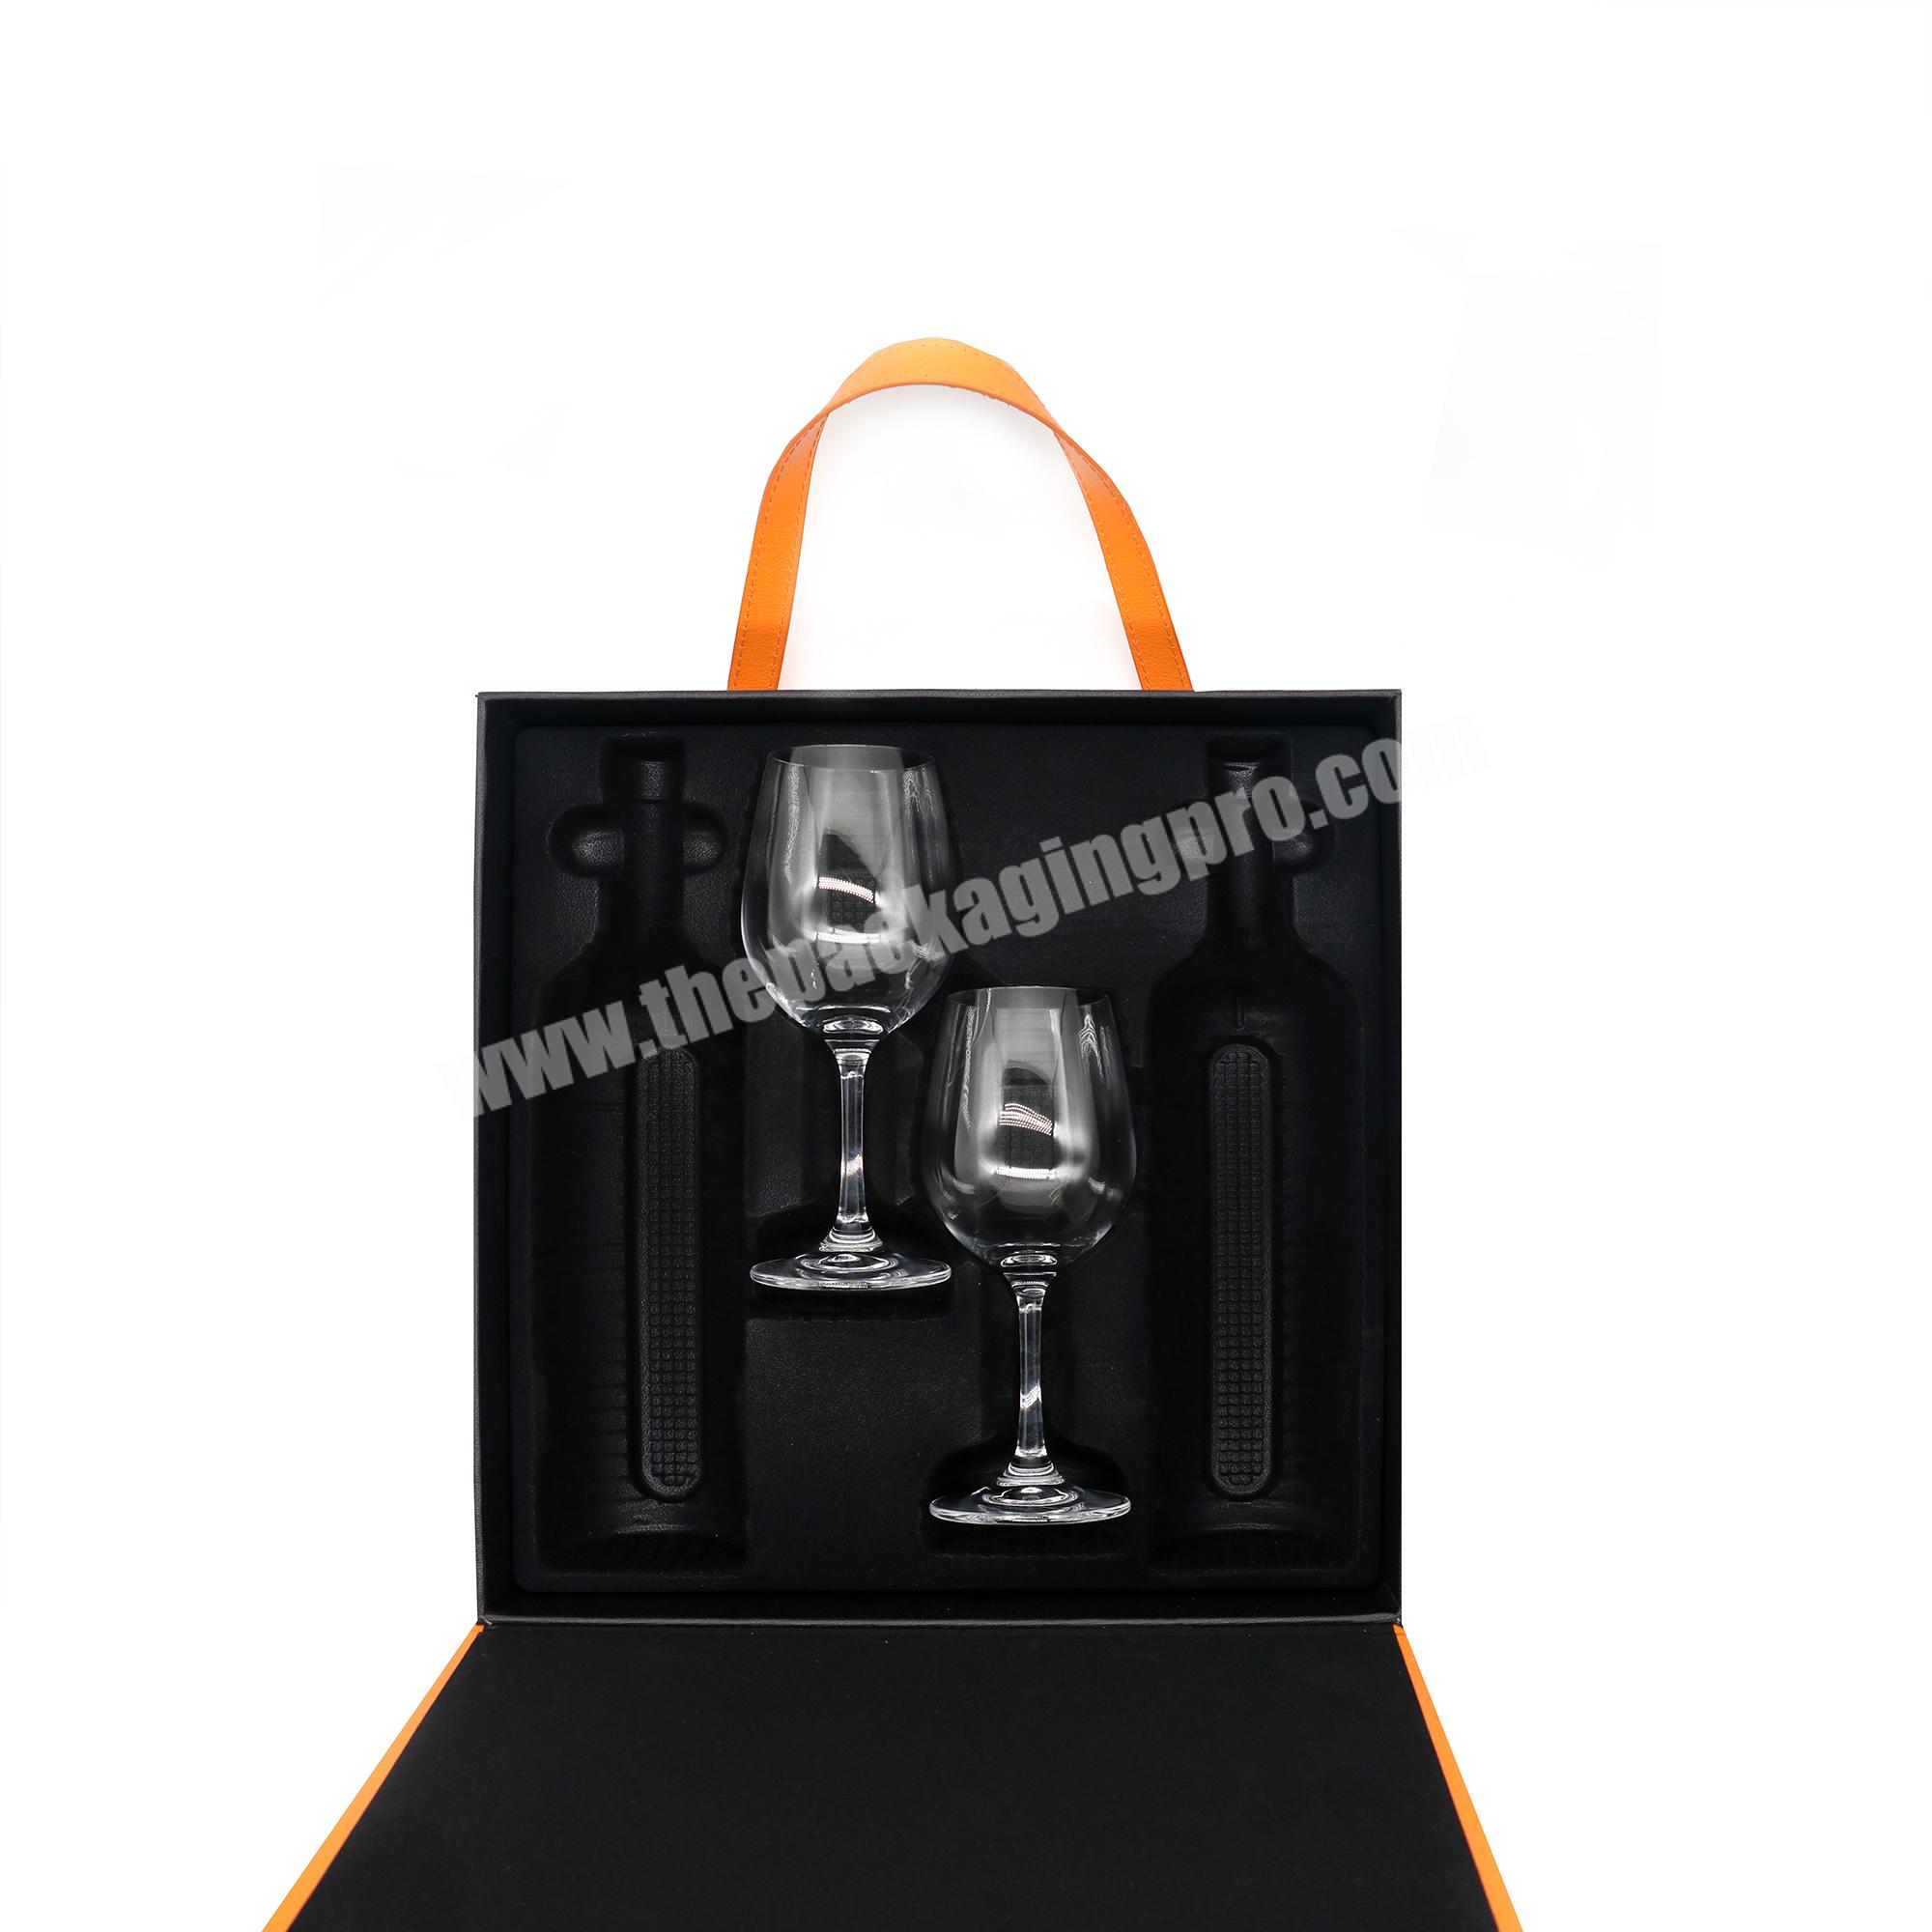 Hign quality deluxe wine box wine glass gift boxes wholesale wine box packaging